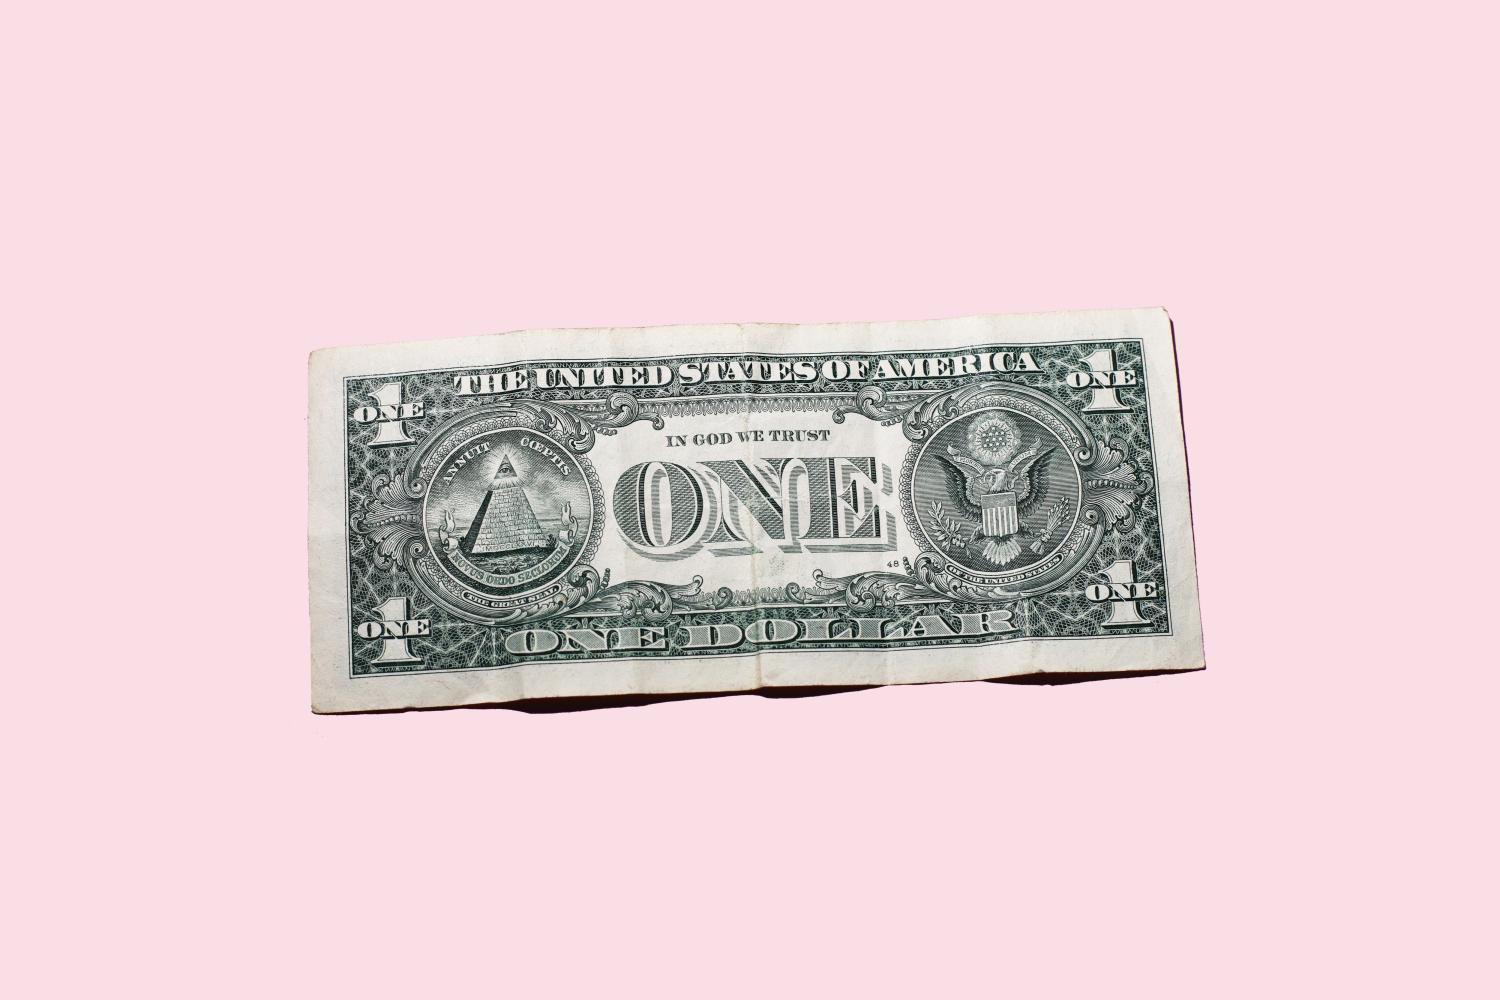 a single US dollar bill, back side up, against a pink background